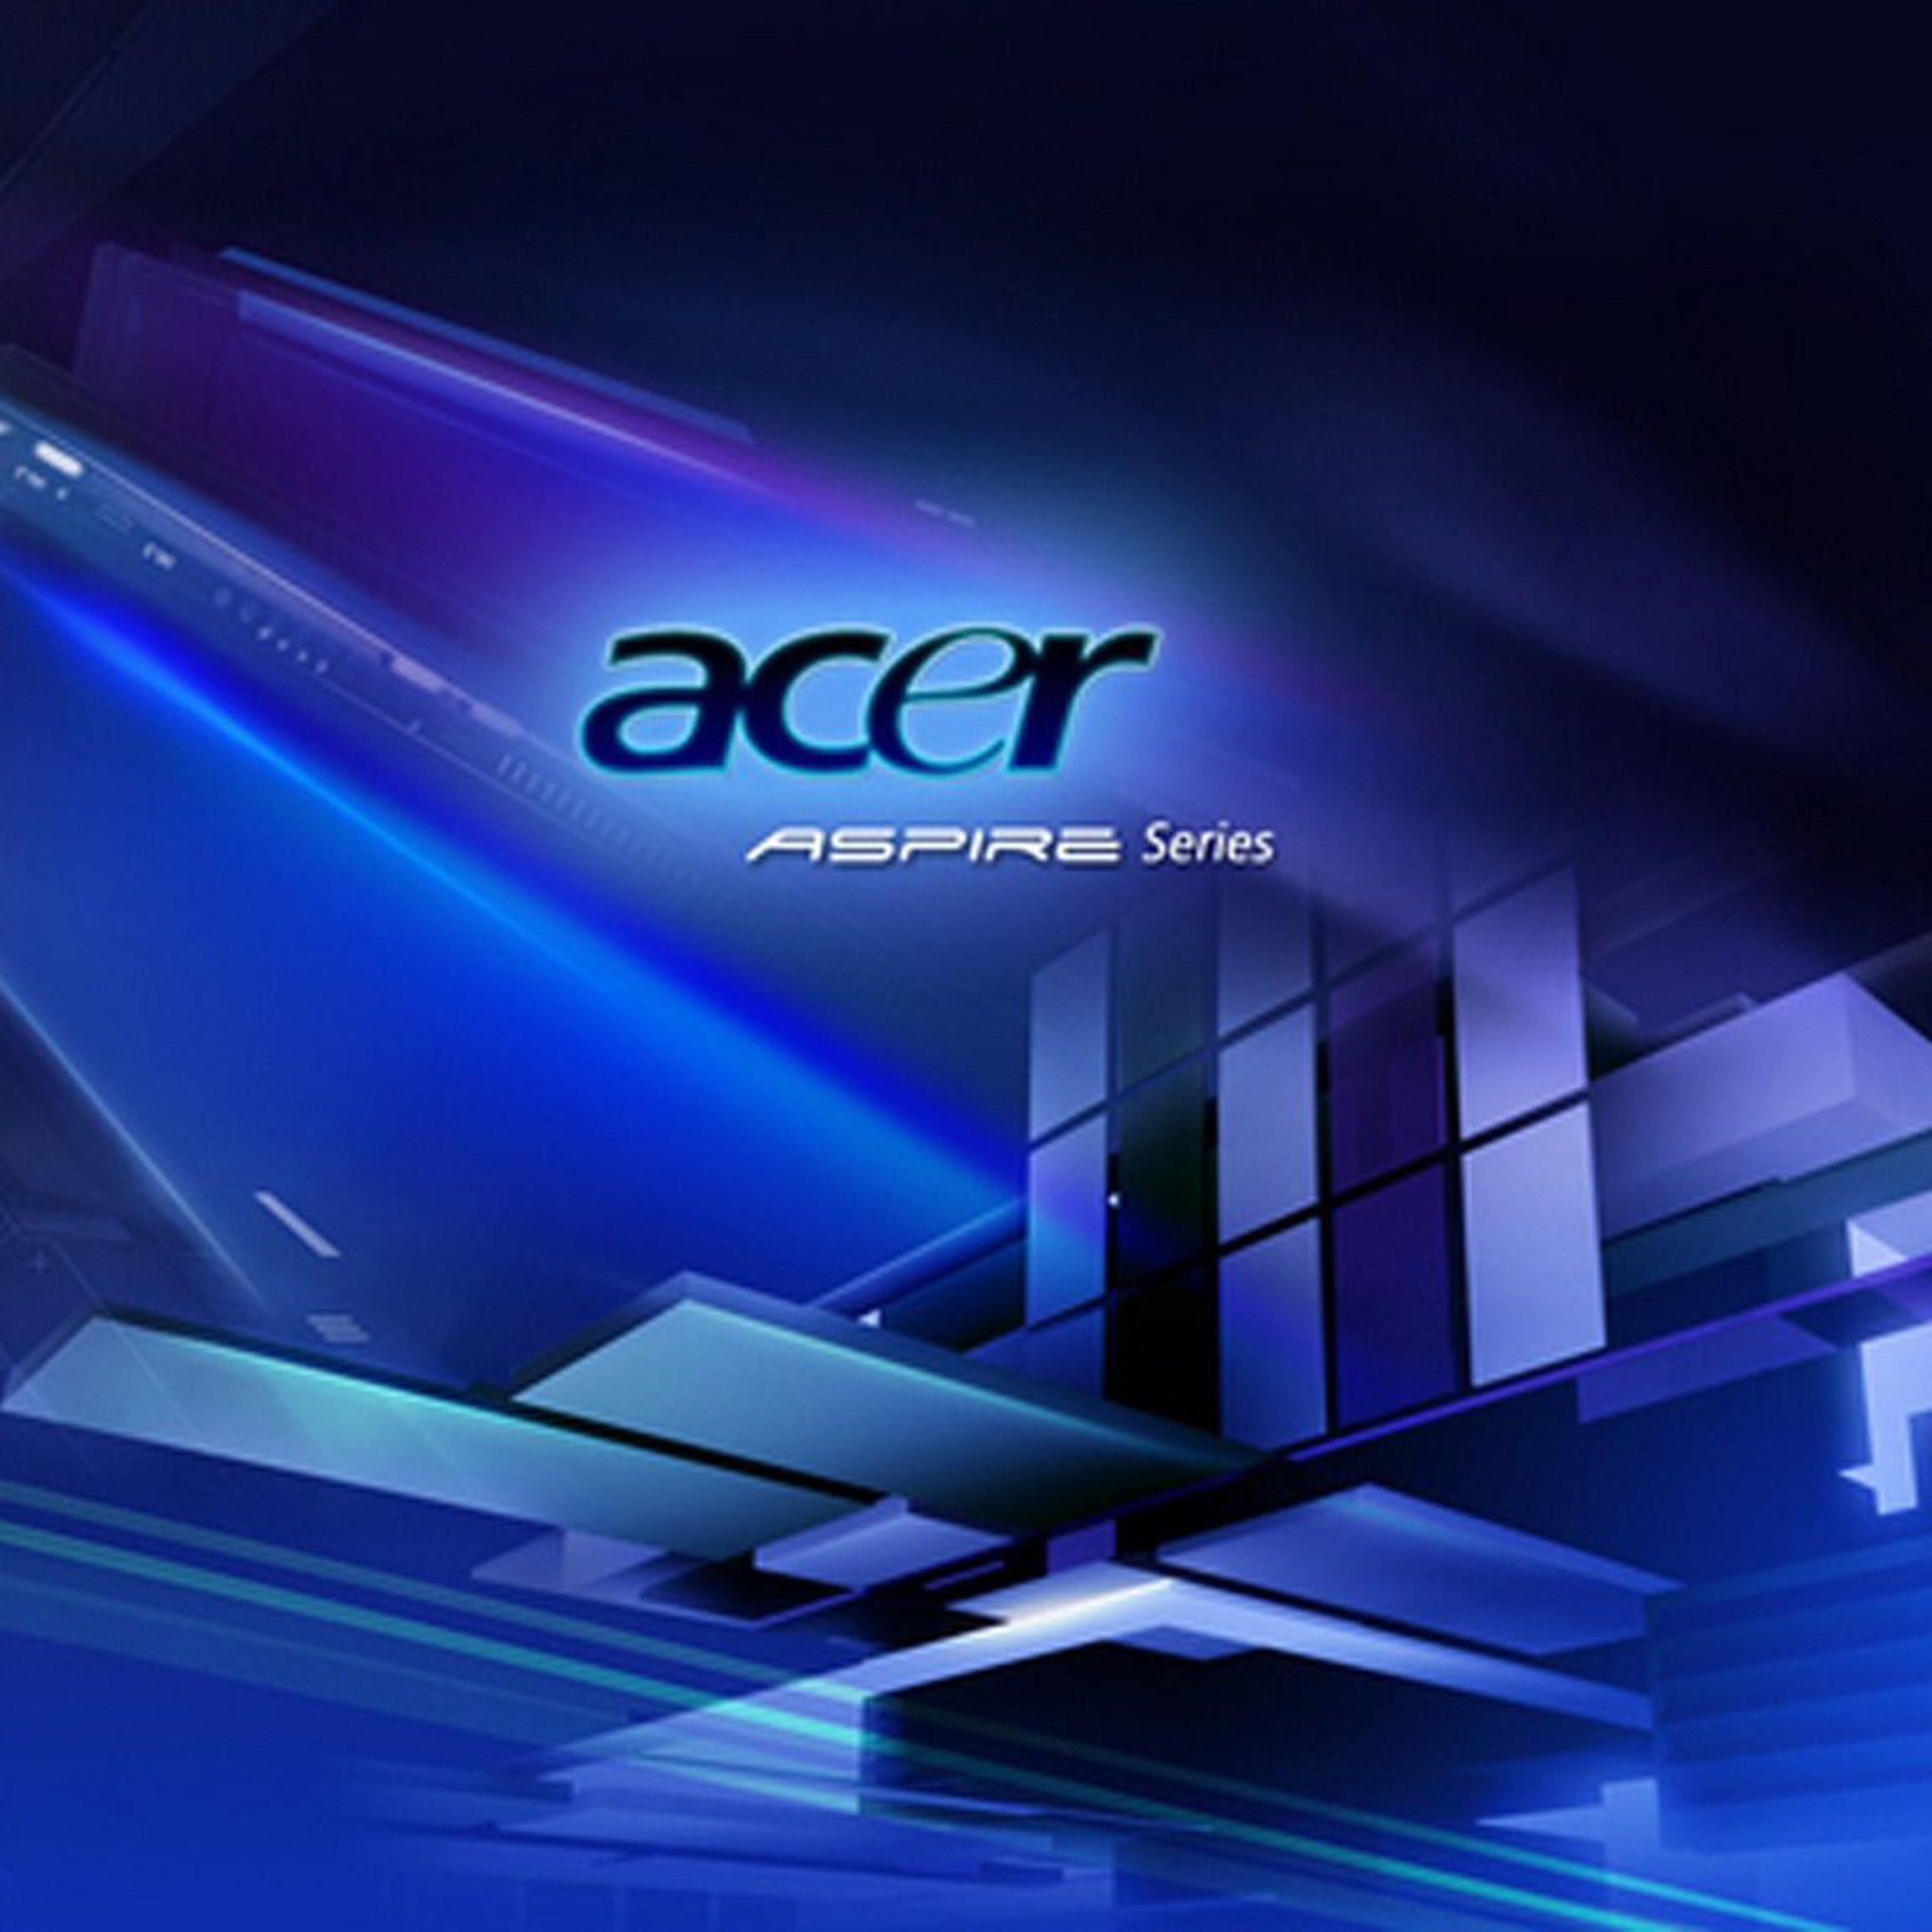 Free Download 07 Acer Aspire Blue Wallpaper Iappsofts Com Ipad タブレット壁紙 ギャラリー